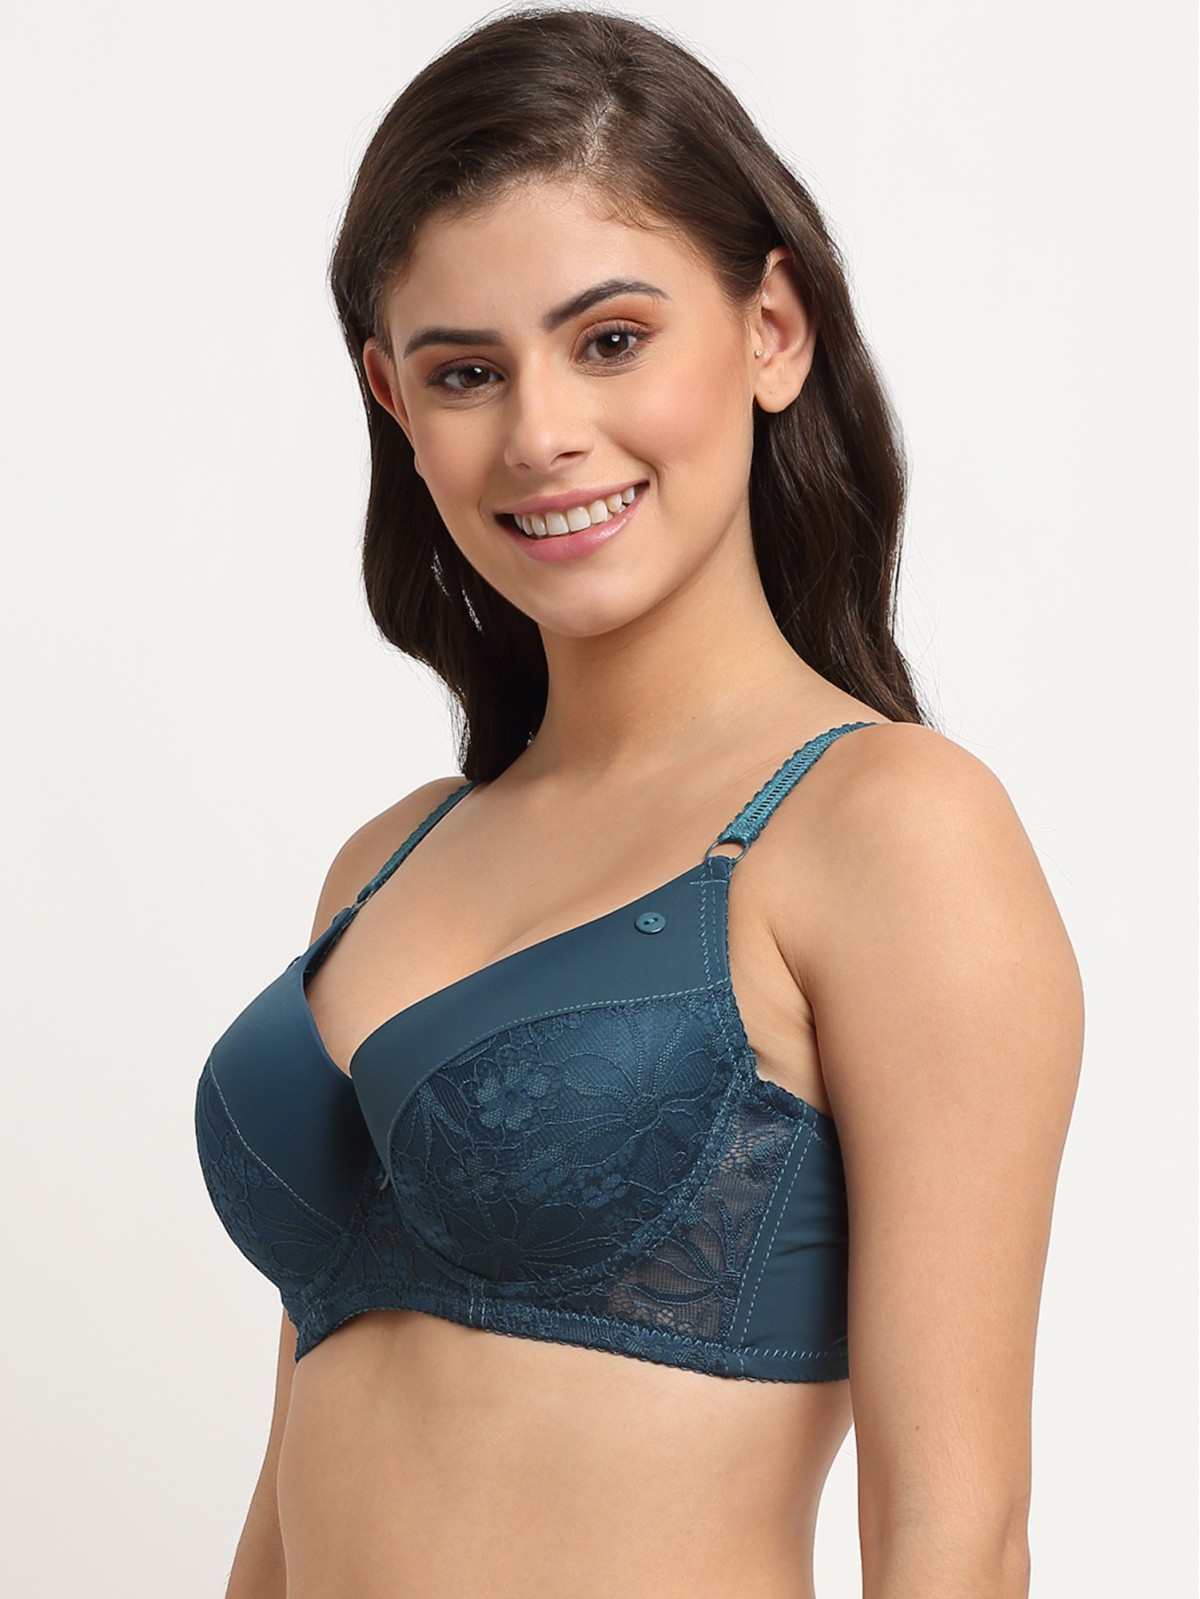 Empowering Sensuality Lace Brassiere K1508B